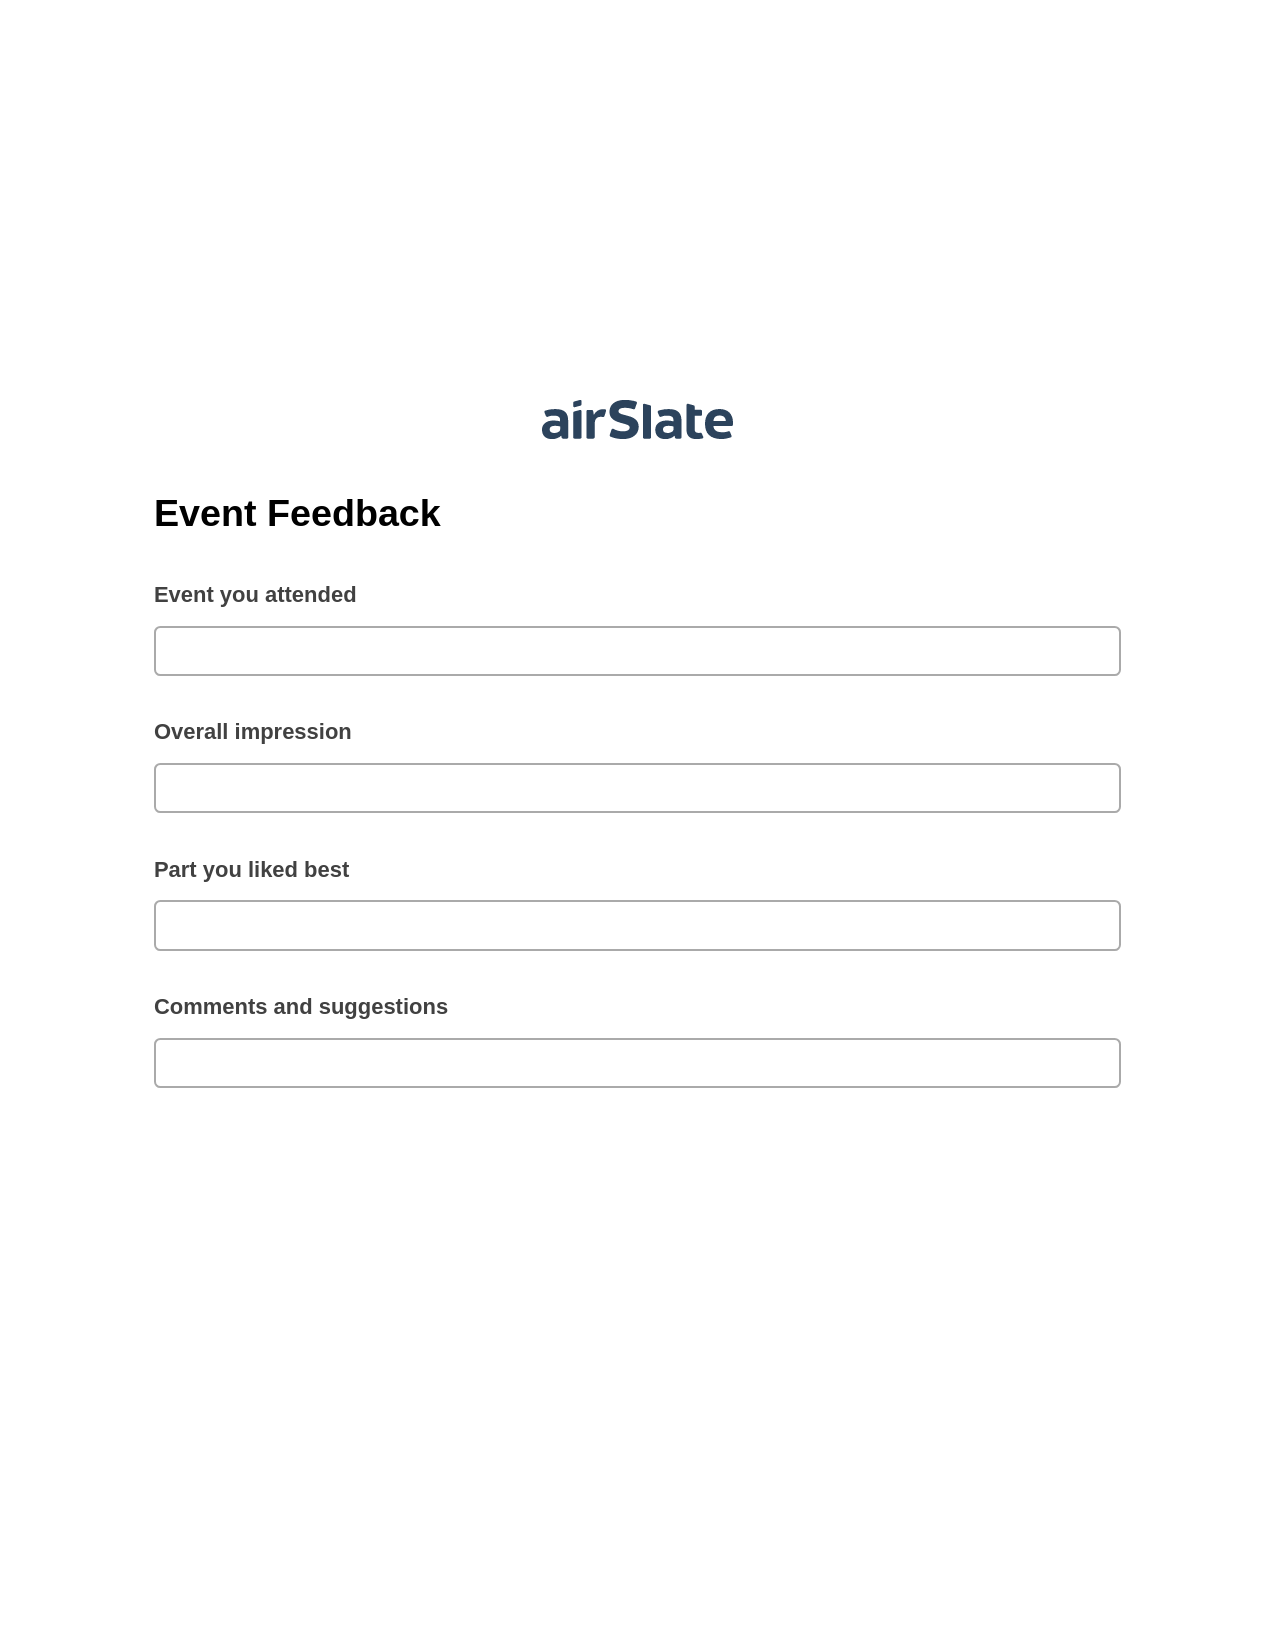 Event Feedback Pre-fill from NetSuite Records Bot, Assign Slate Name Bot, Export to Excel 365 Bot